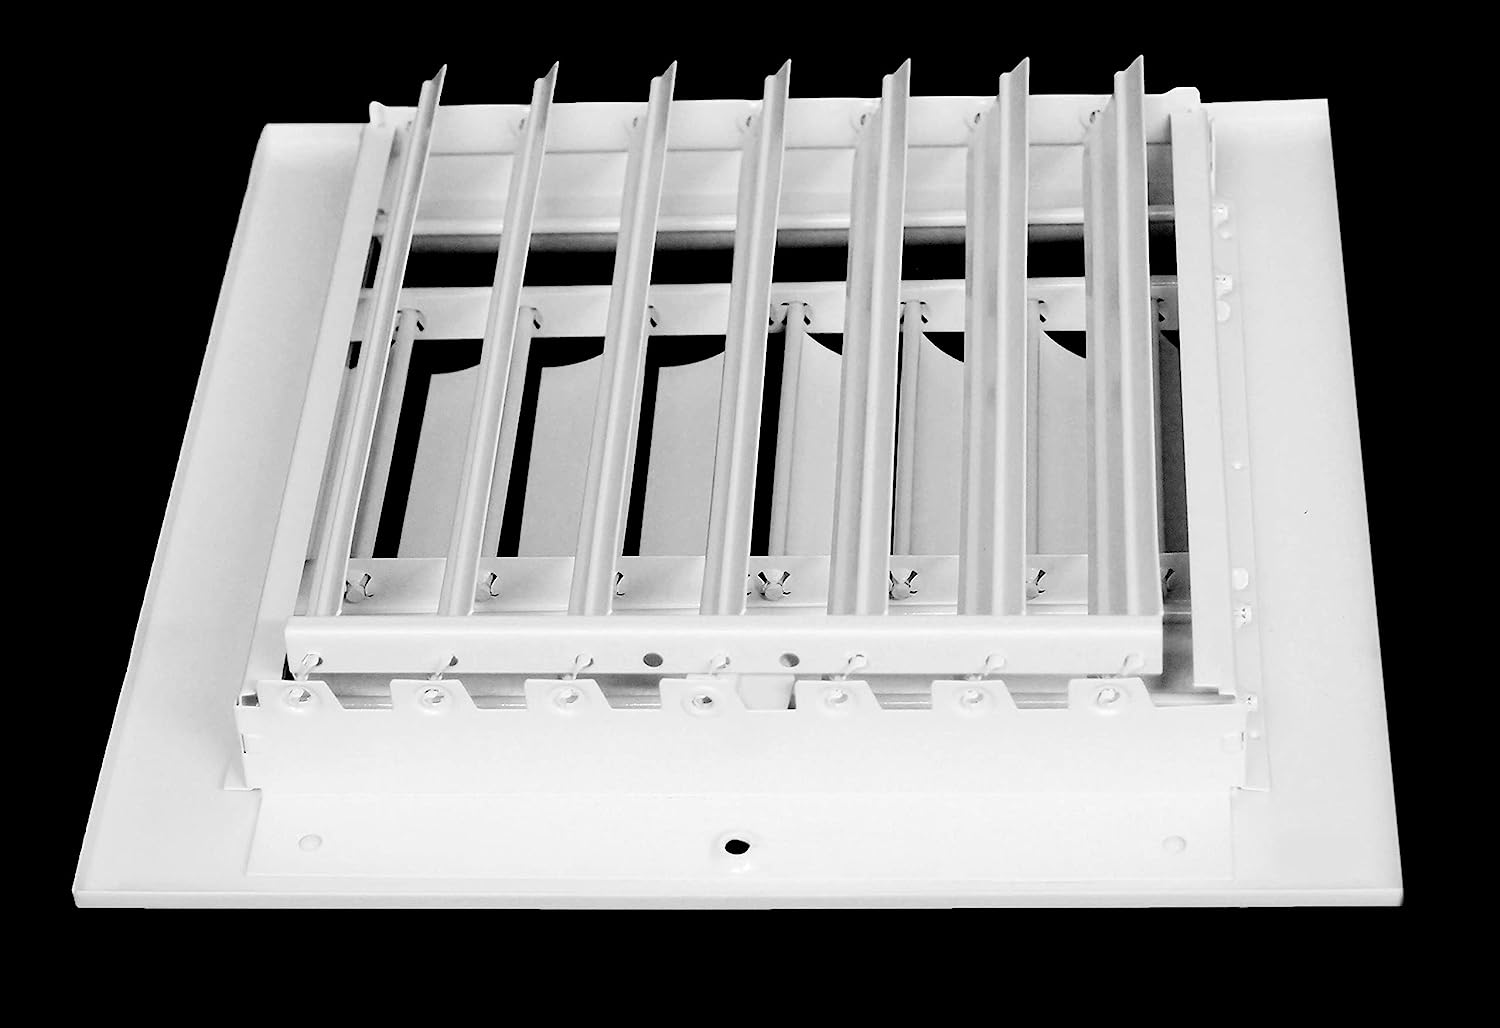 Grey Air Vent Grille with Adjustable Shutter Flat Wall Duct Ventilation  Cover